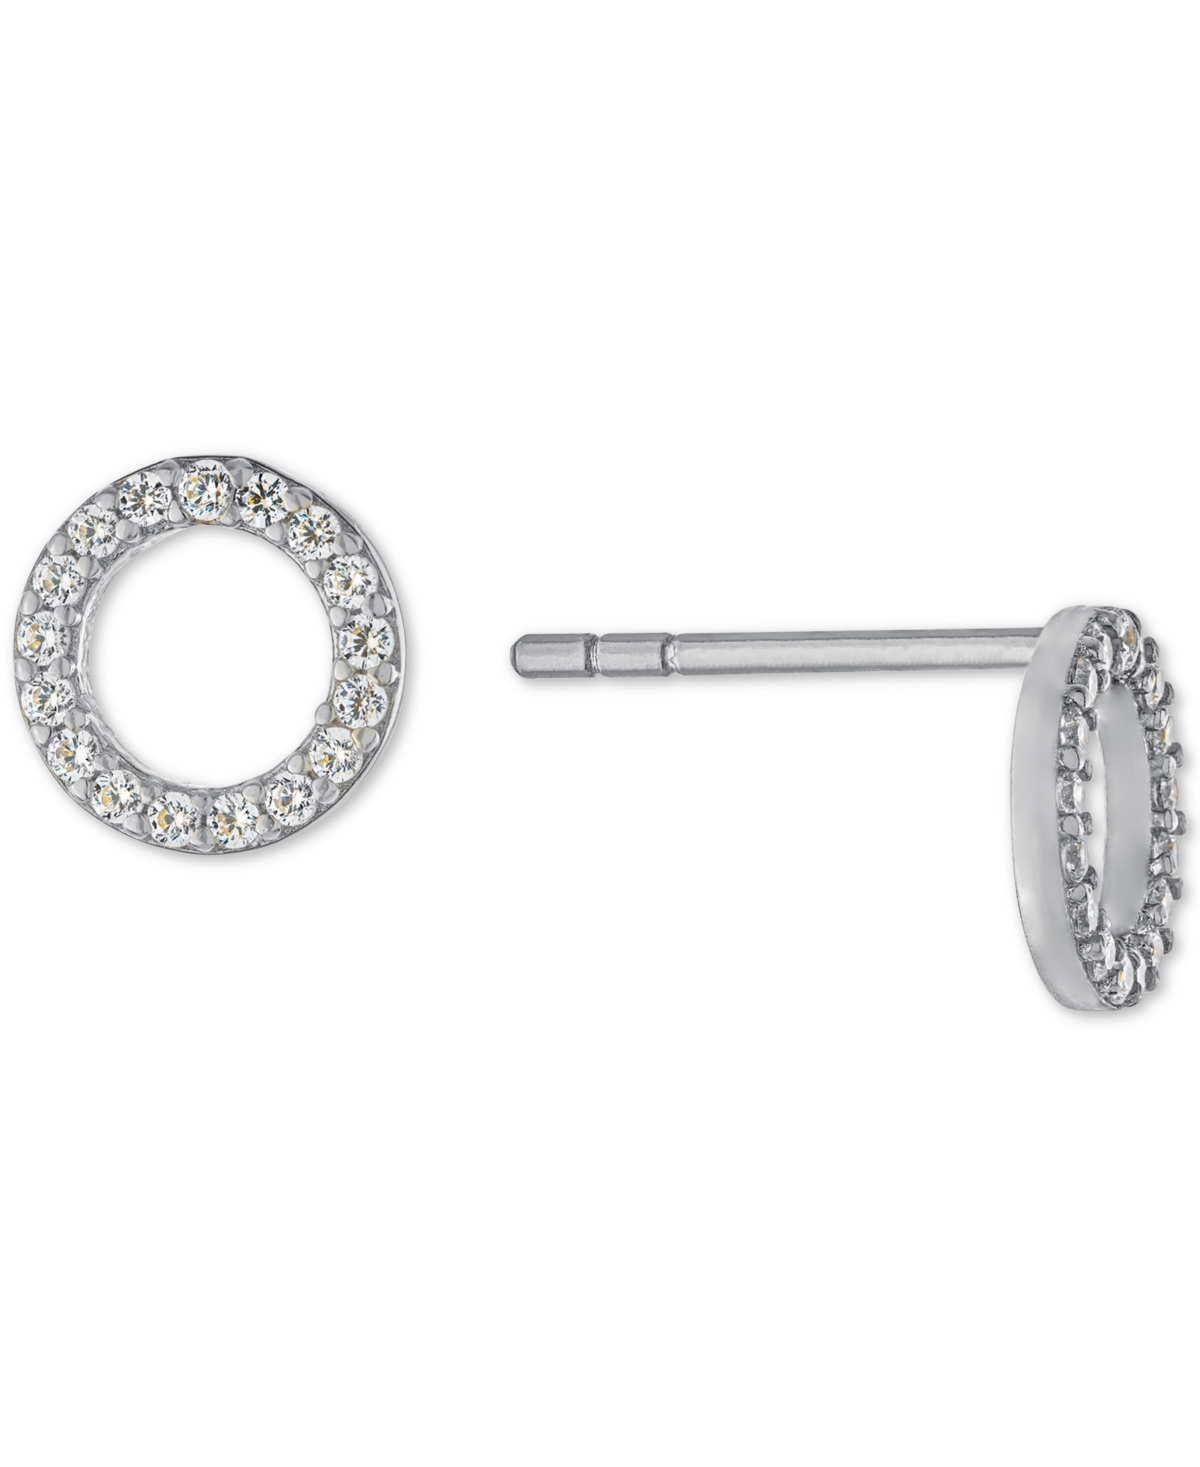 Cubic Zirconia Circle Stud Earrings in Sterling Silver, Created for Macy's - Sterling Silver